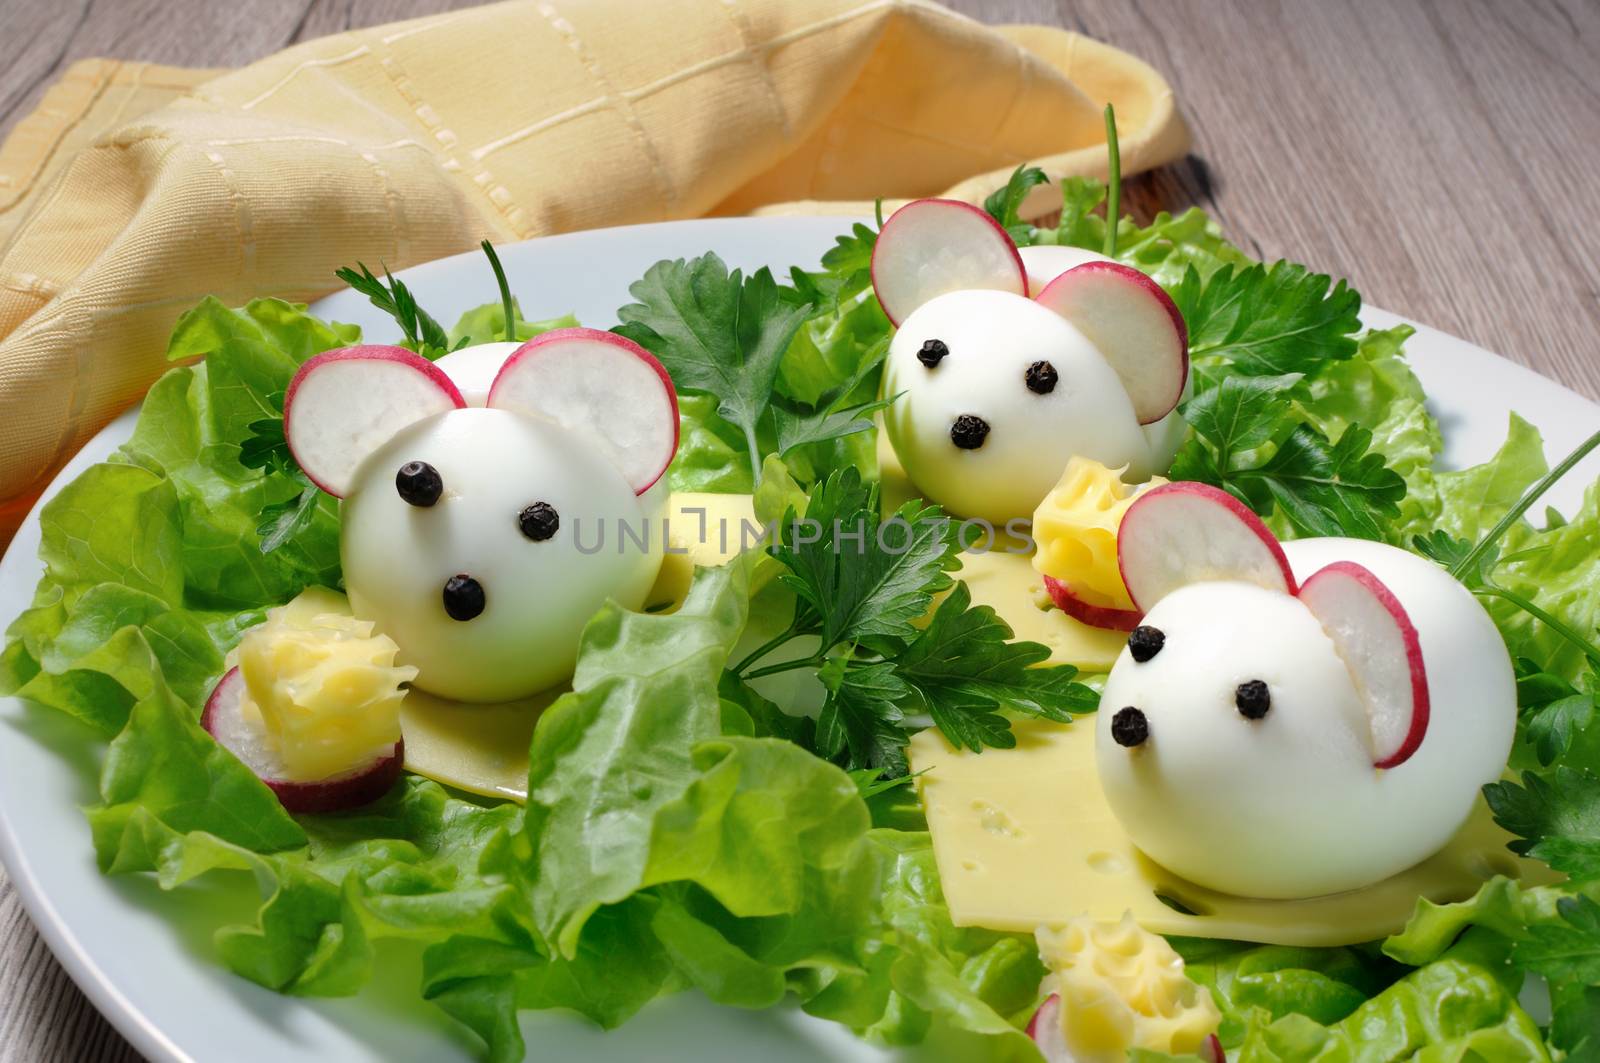 Serving a festive children's snack, boiled eggs in the form of mice in lettuce leaves and cheese cubes